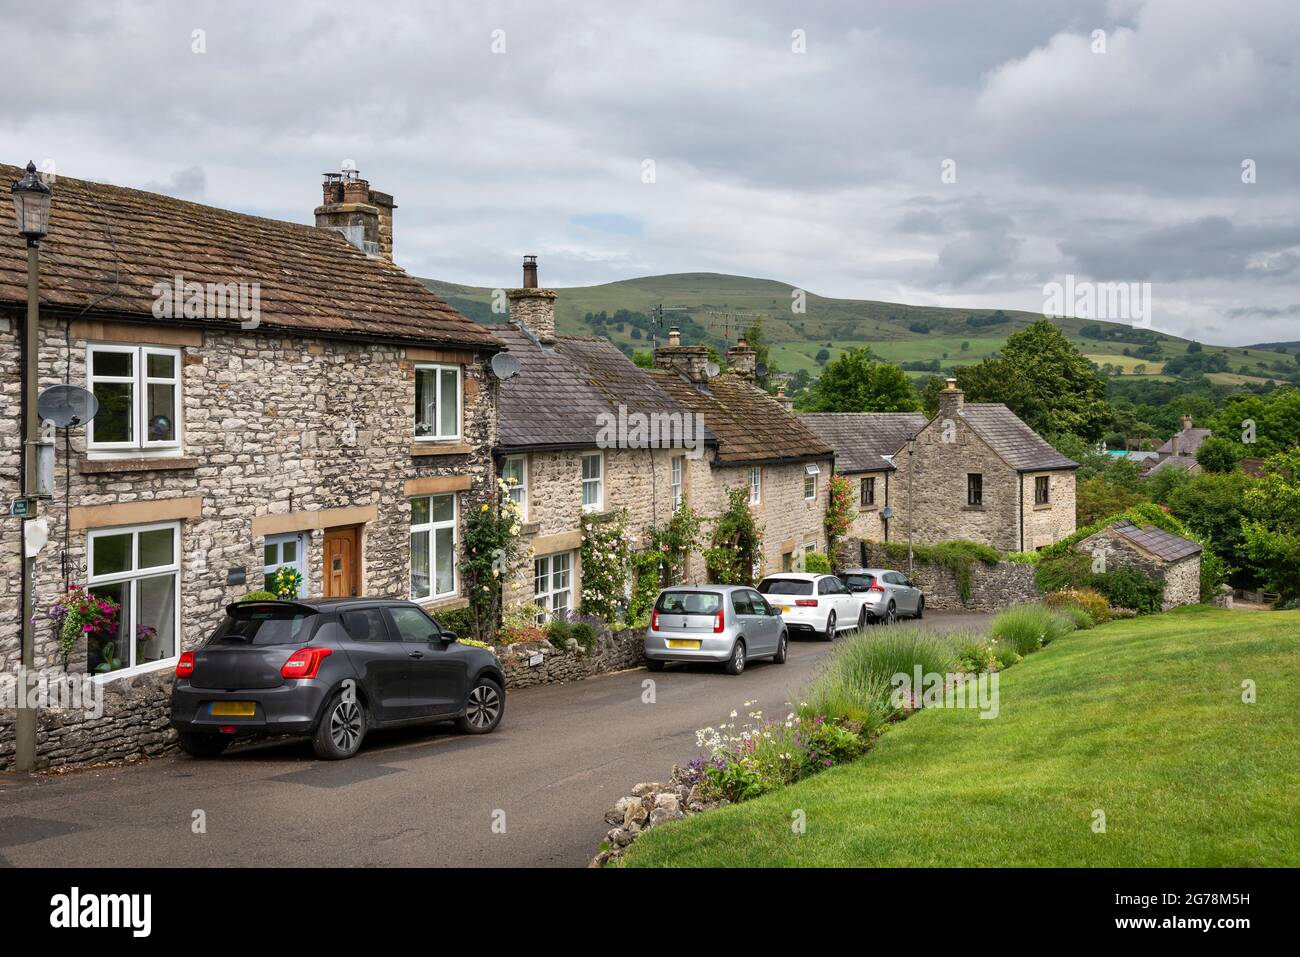 Street of stone cottages in the picturesque village of Castleton in the Hope Valley, Derbyshire, England. Stock Photo